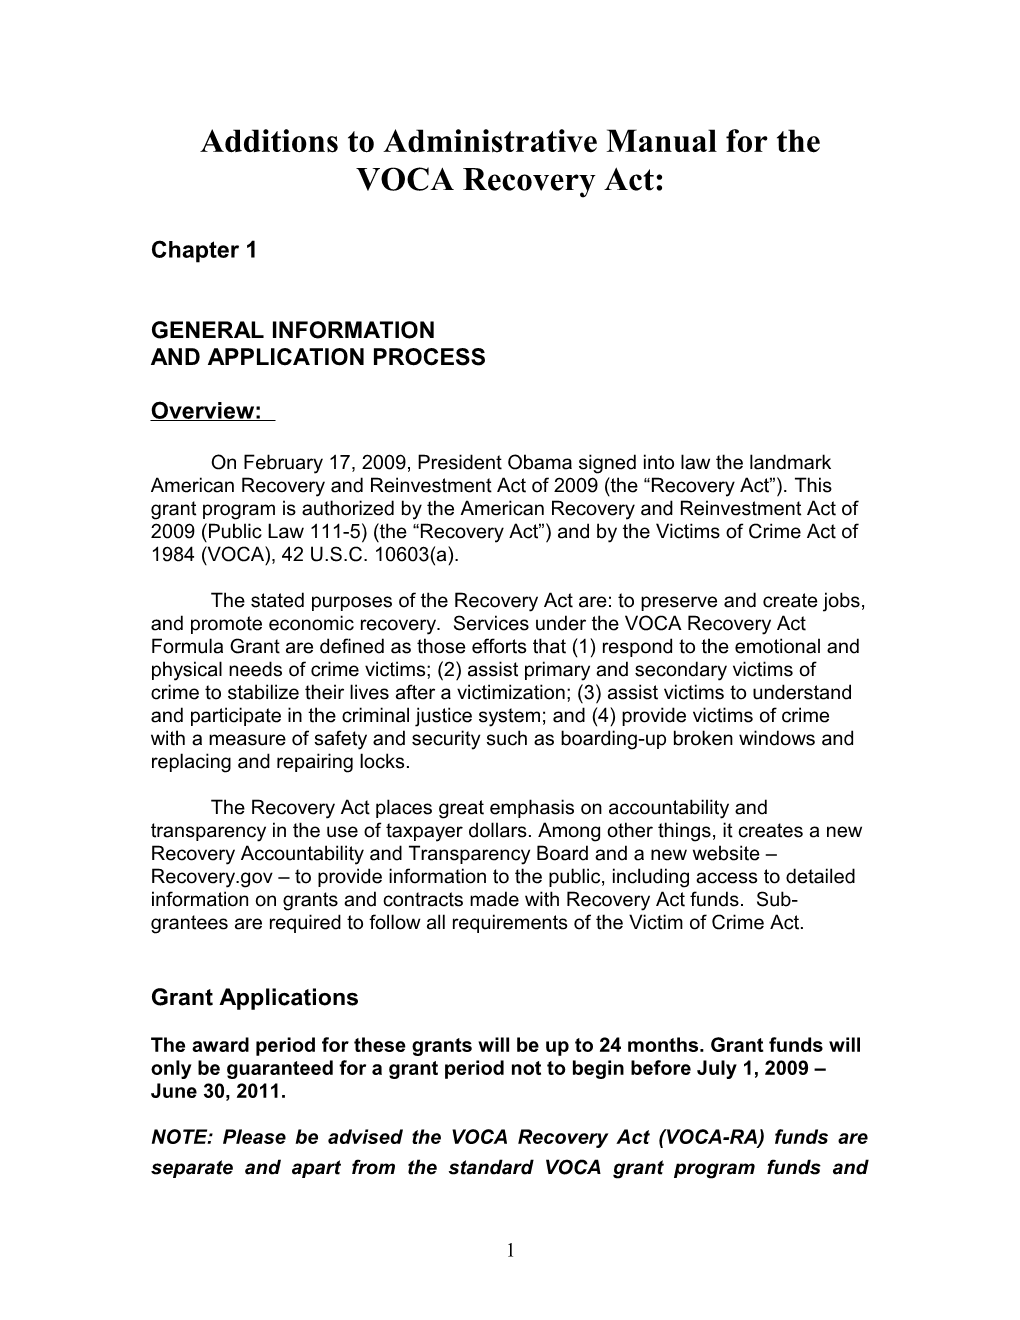 Additions to Administrative Manual for the VOCA Recovery Act